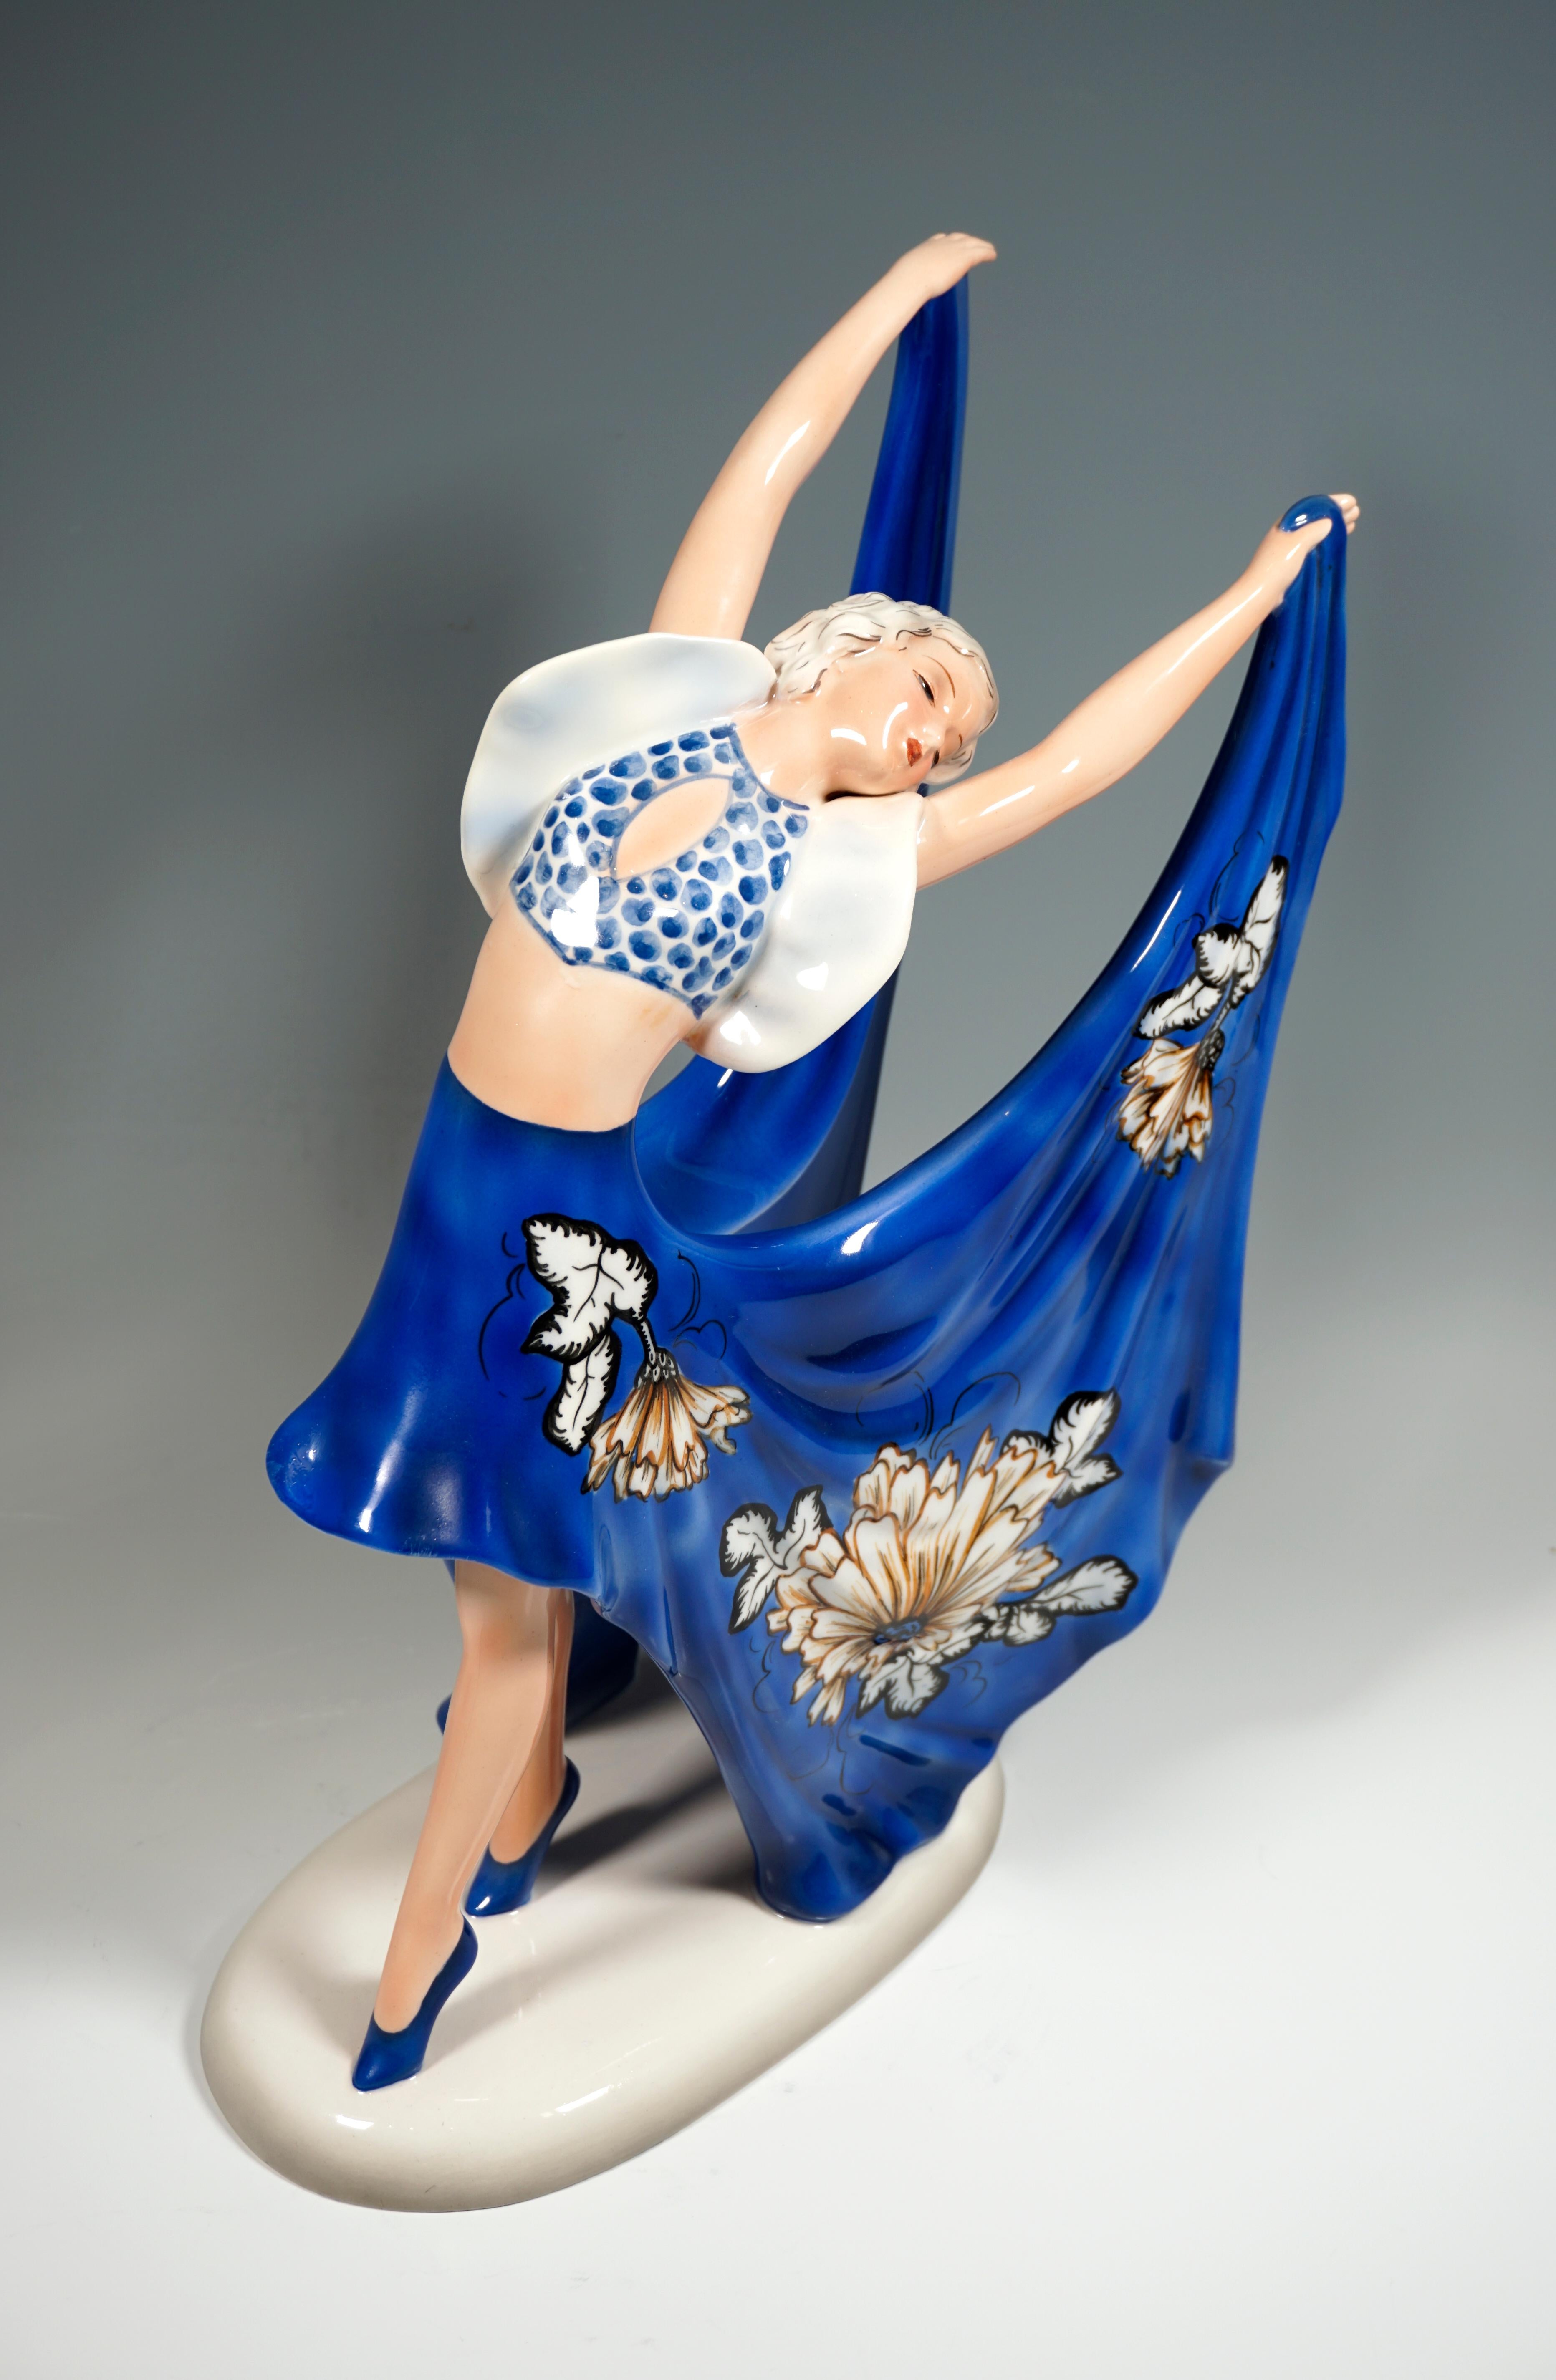 Rare Goldscheider Art Déco Ceramic Figurine.
Gracefully posing dancer in blue and white costume: dotted bustier with white cap sleeves and a short skirt at the front with long, wide side parts slit on the back with white, yellow and black floral